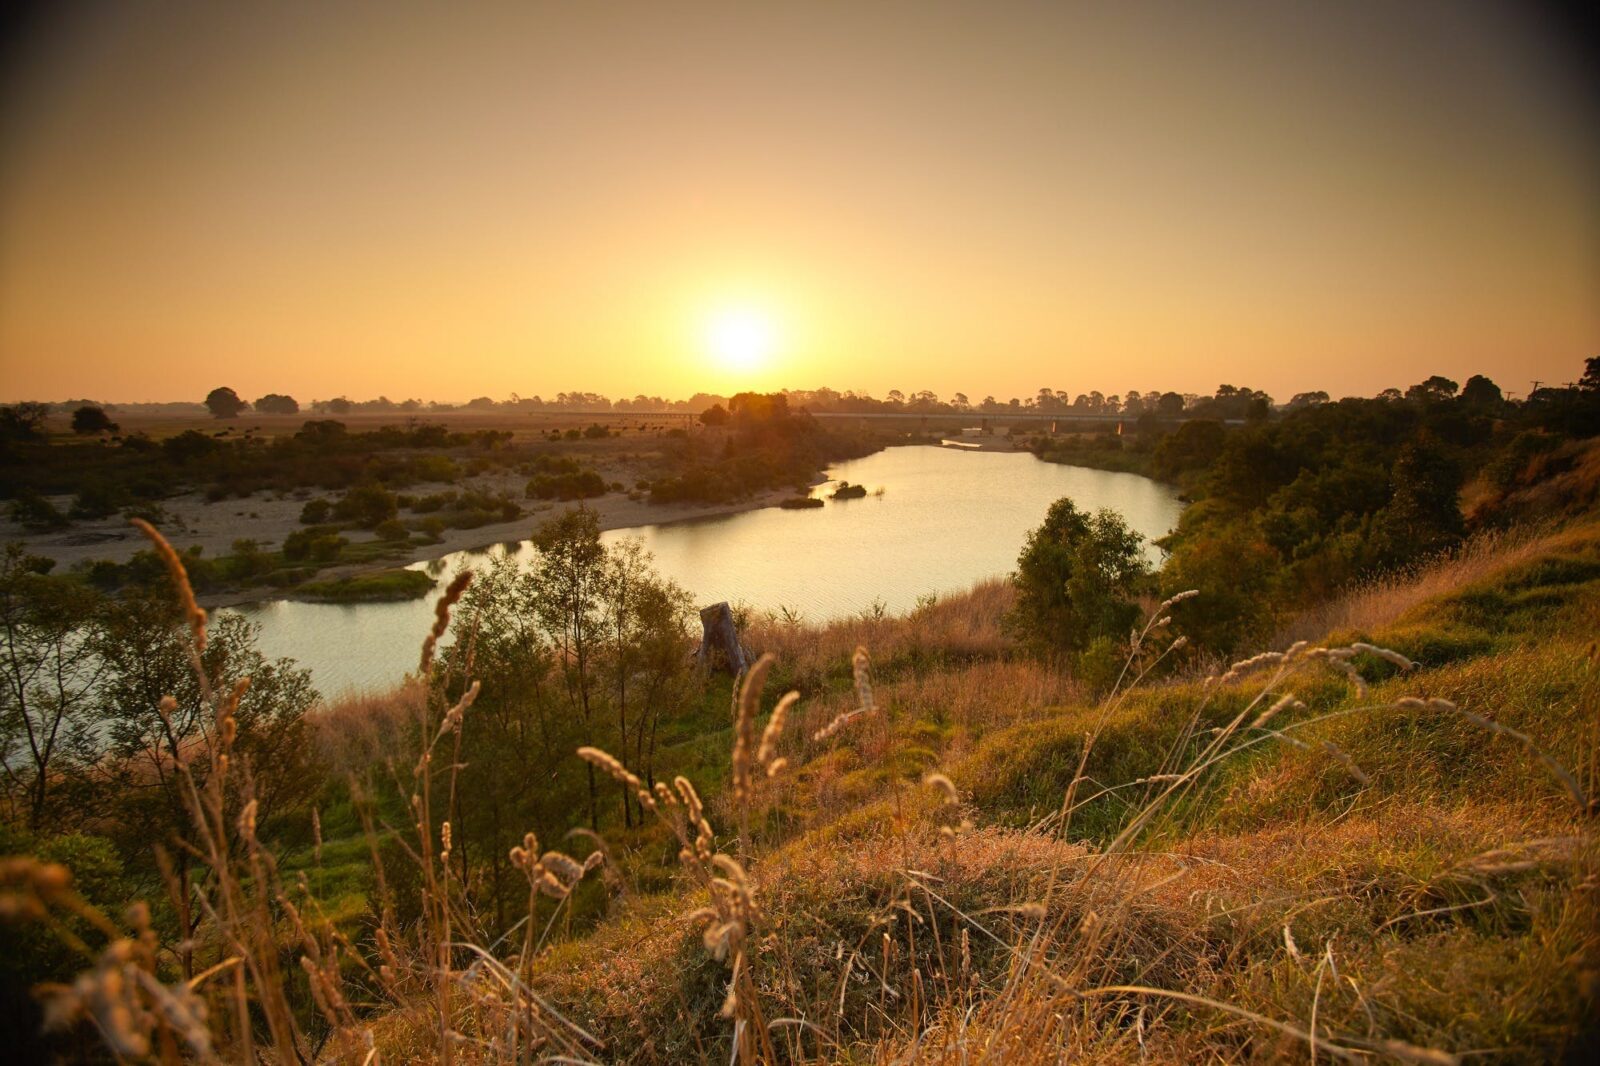 A stunning sunset view from the Knob Reserve, Stratford.